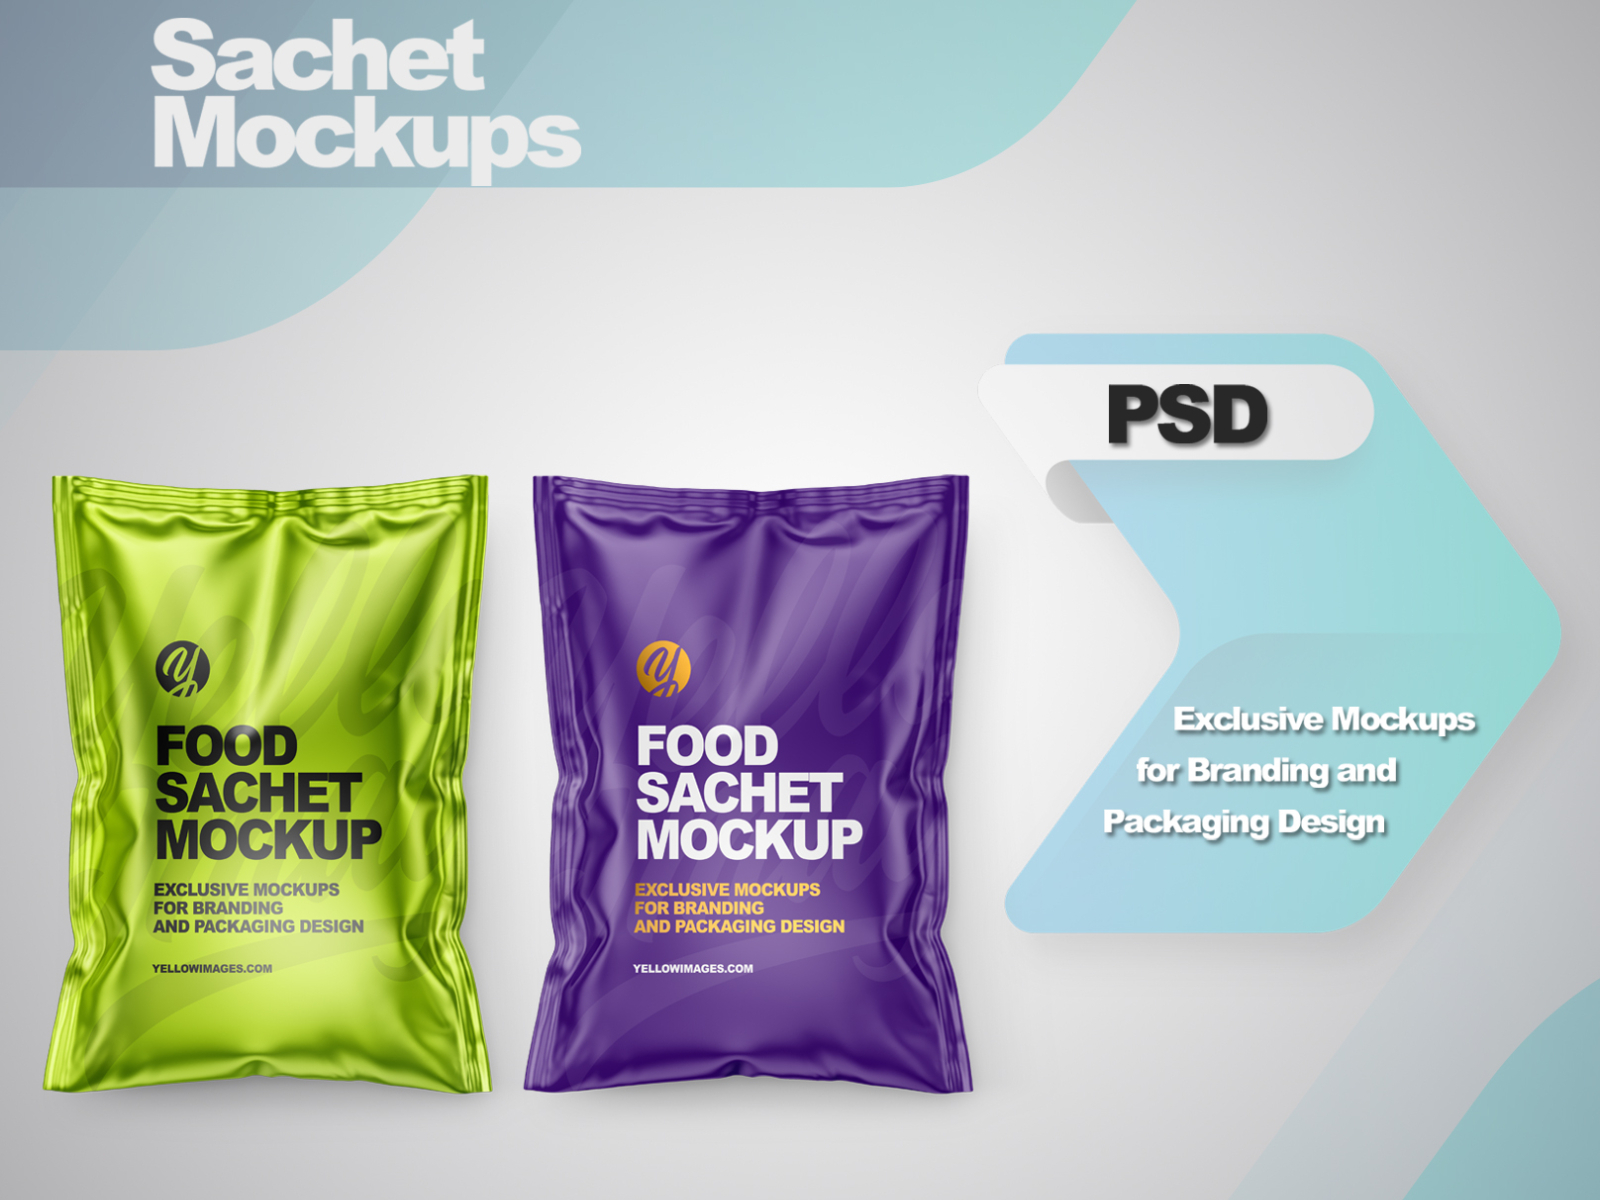 Download Sachets Mockups By Andrey Gapon On Dribbble PSD Mockup Templates